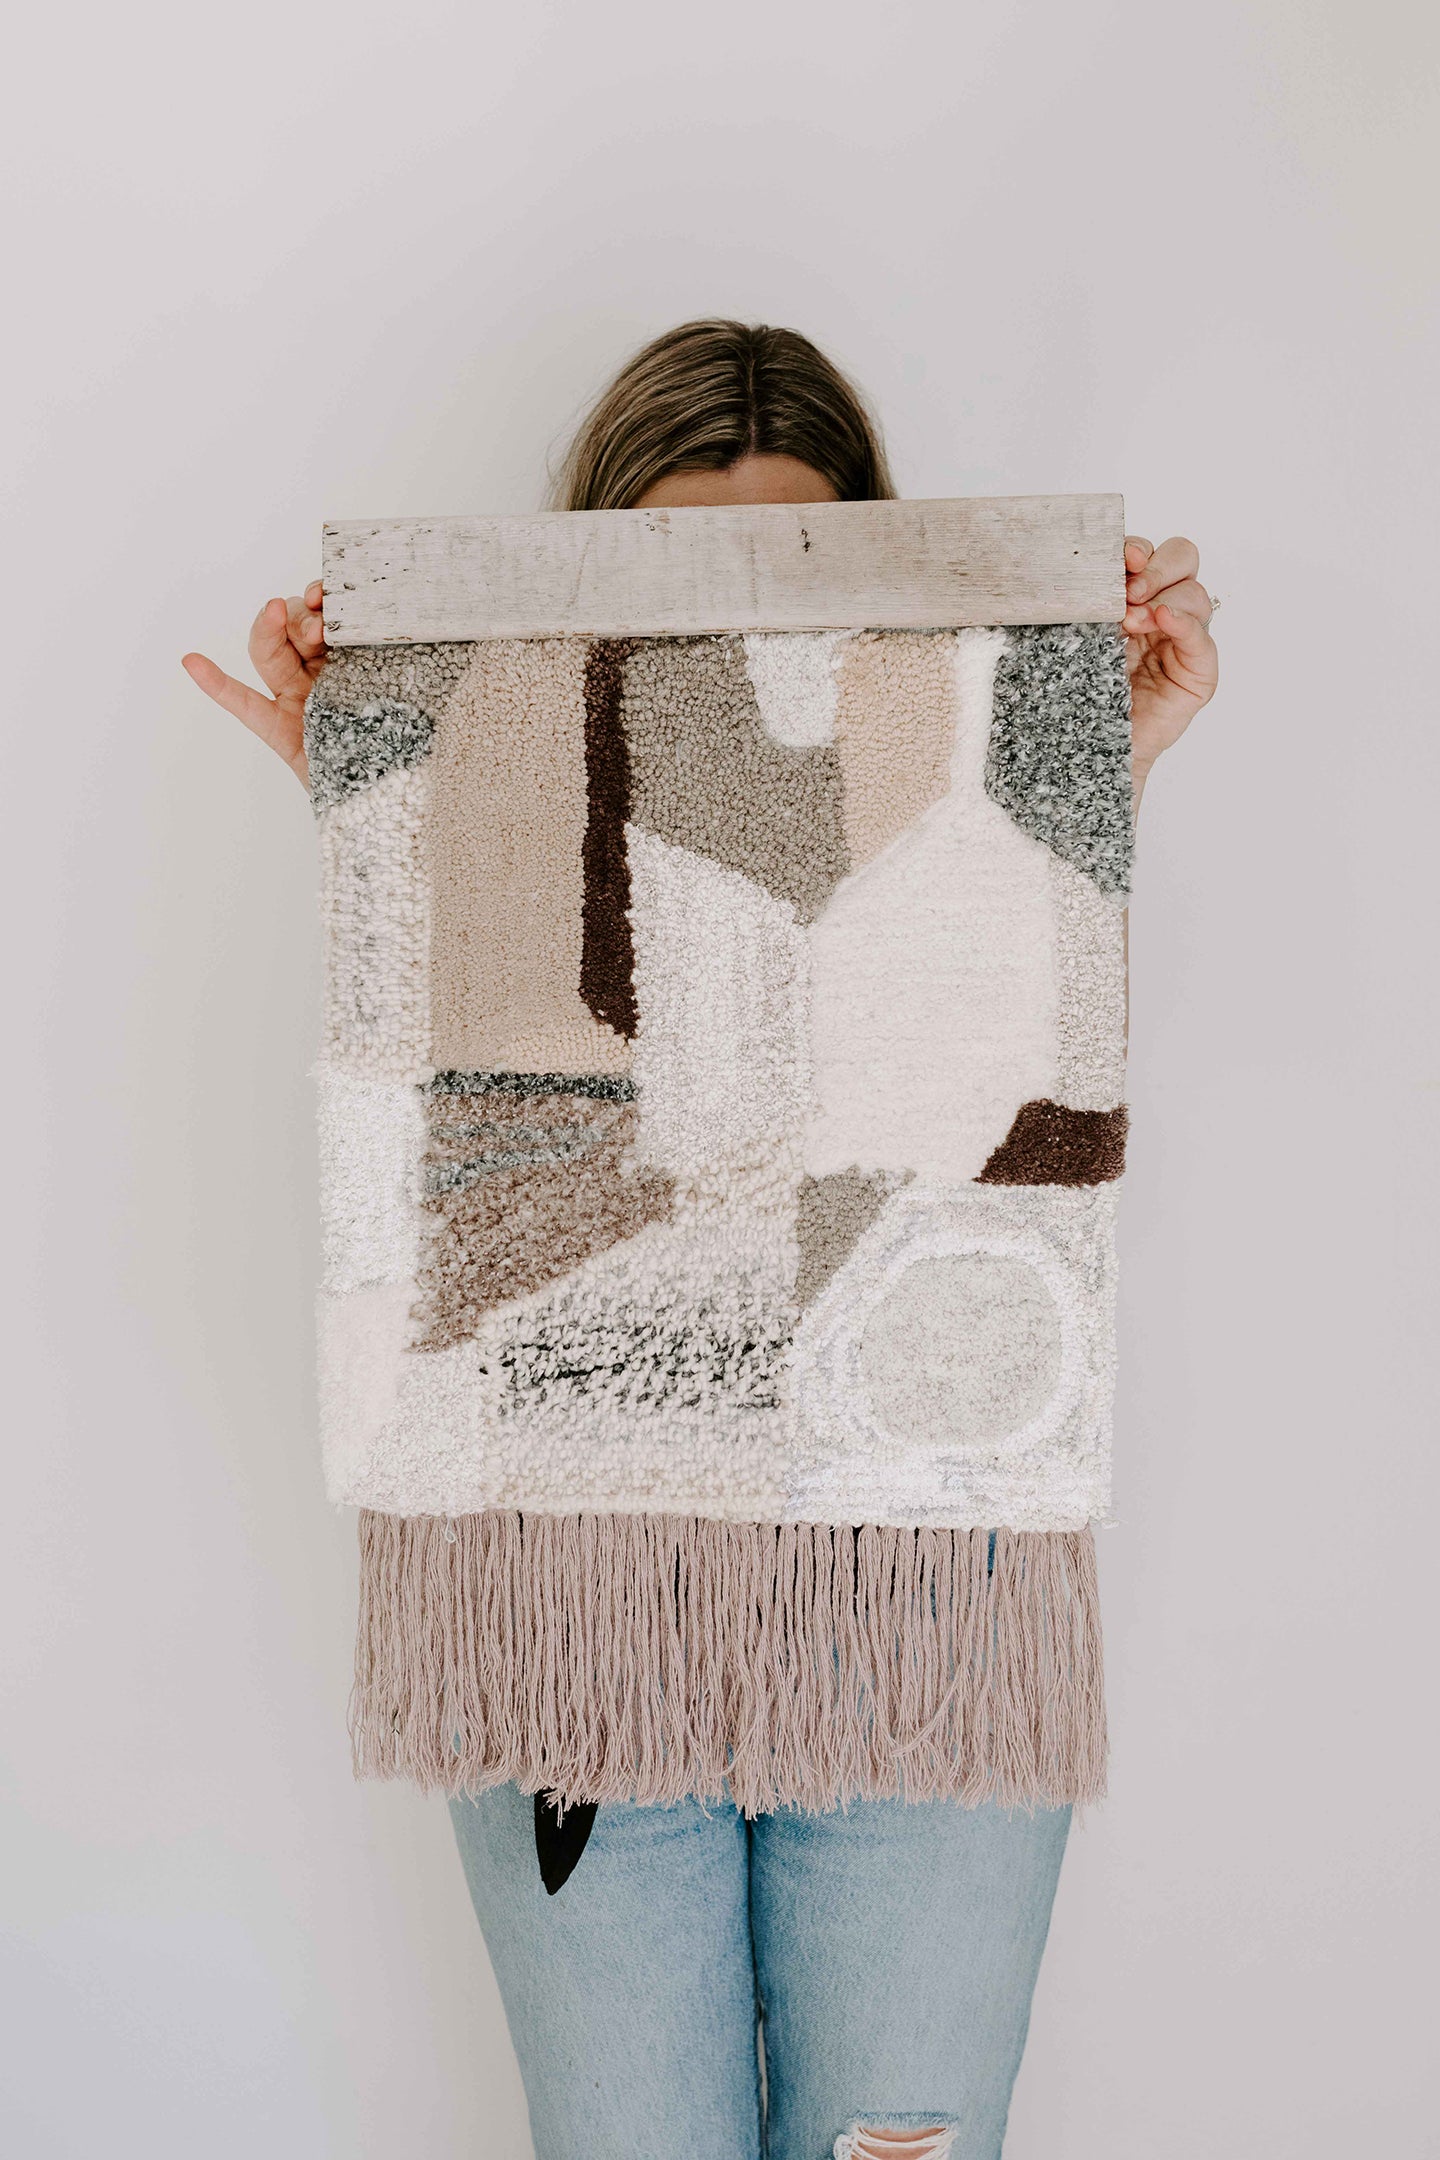 Tufted Wall hanging | neutral grey and white abstract design | Boho wall tapestry rug